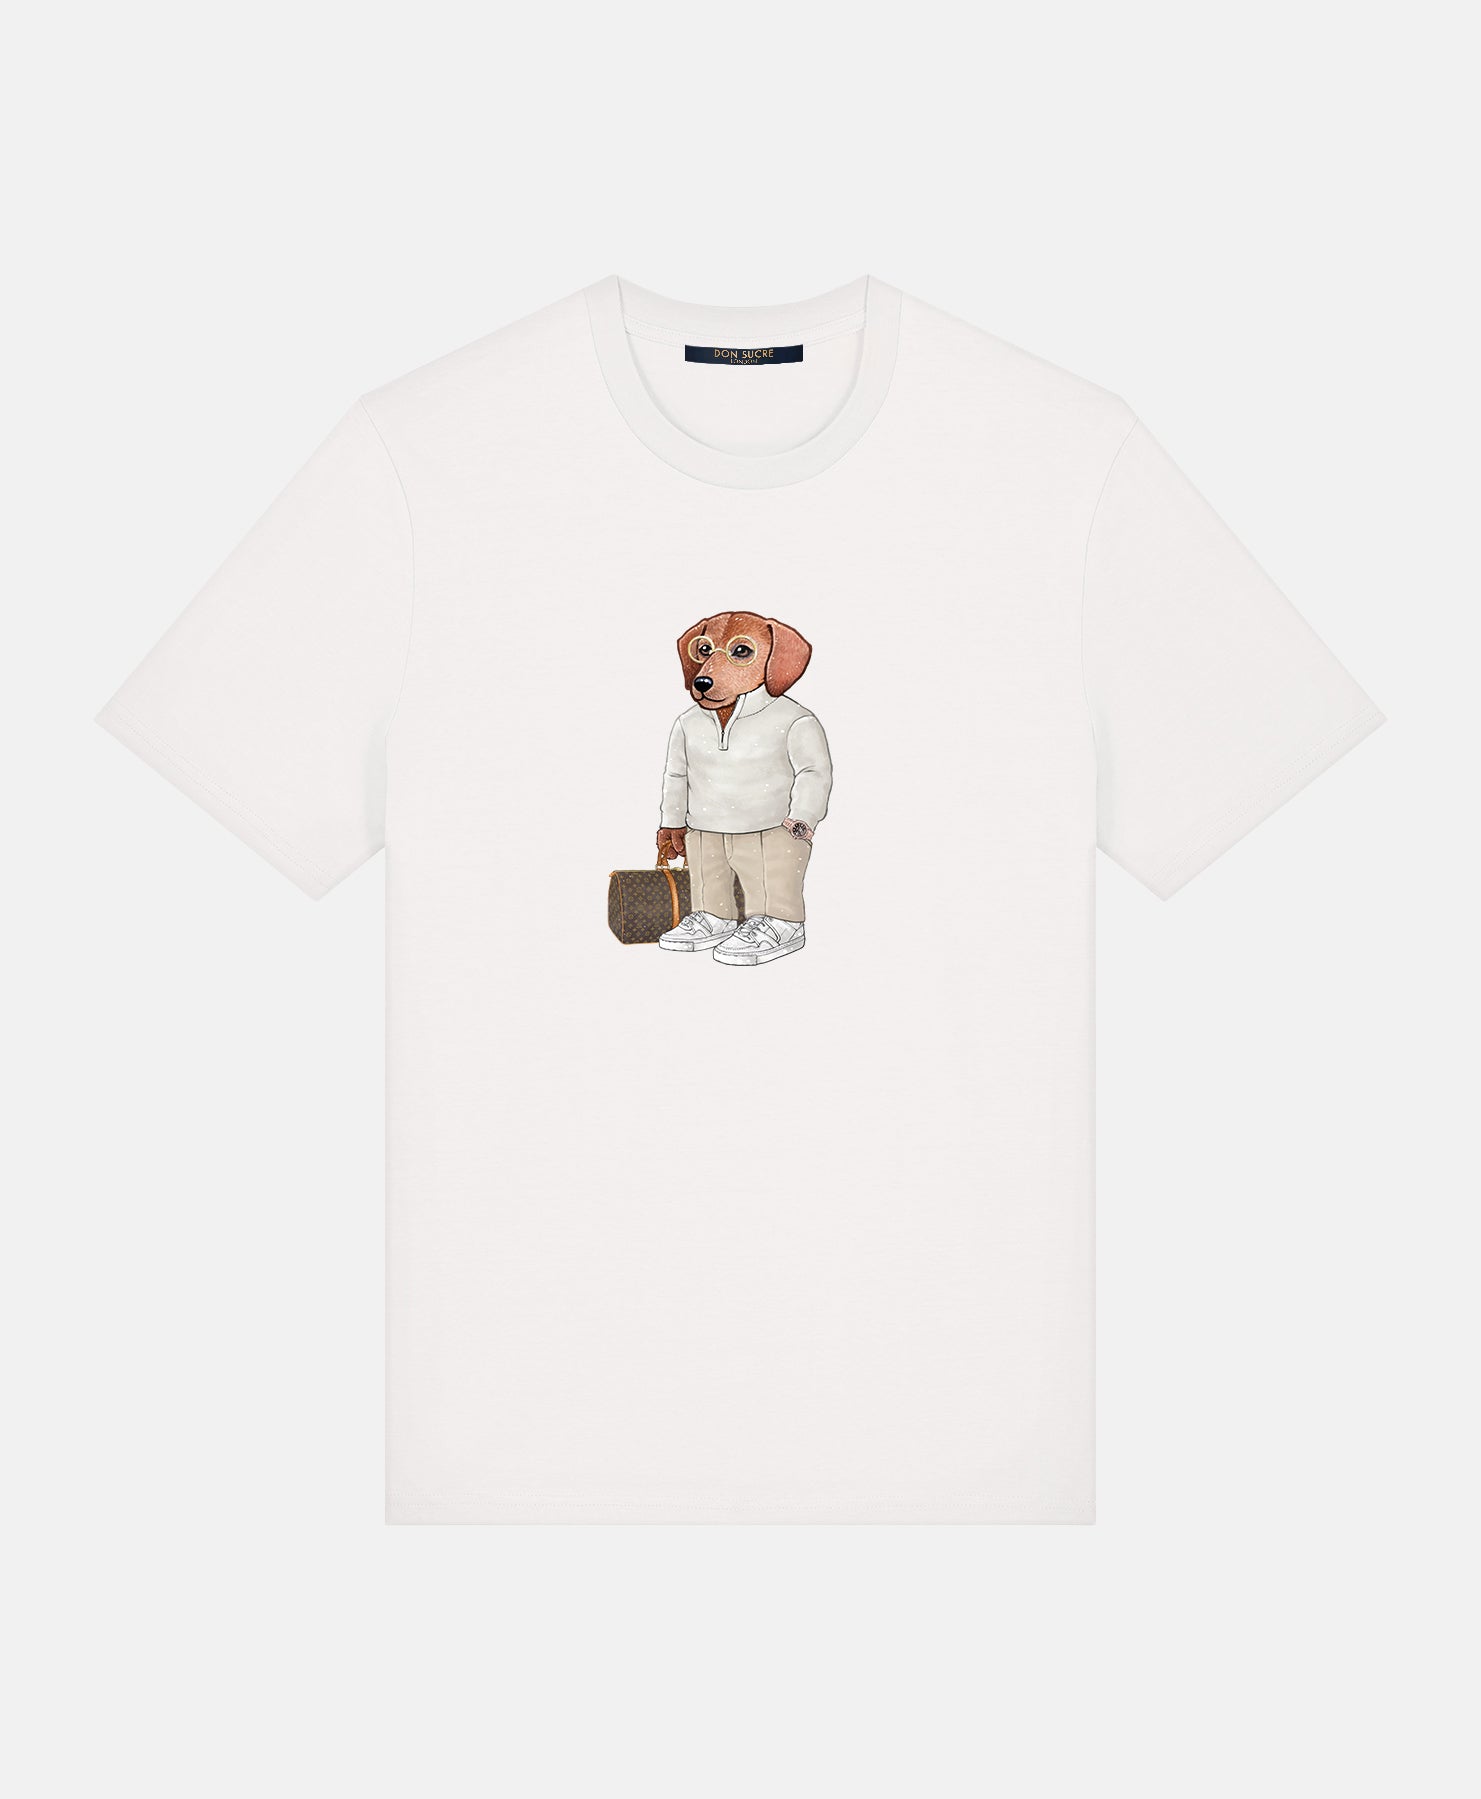 Doxie "Top Dog" T-shirt